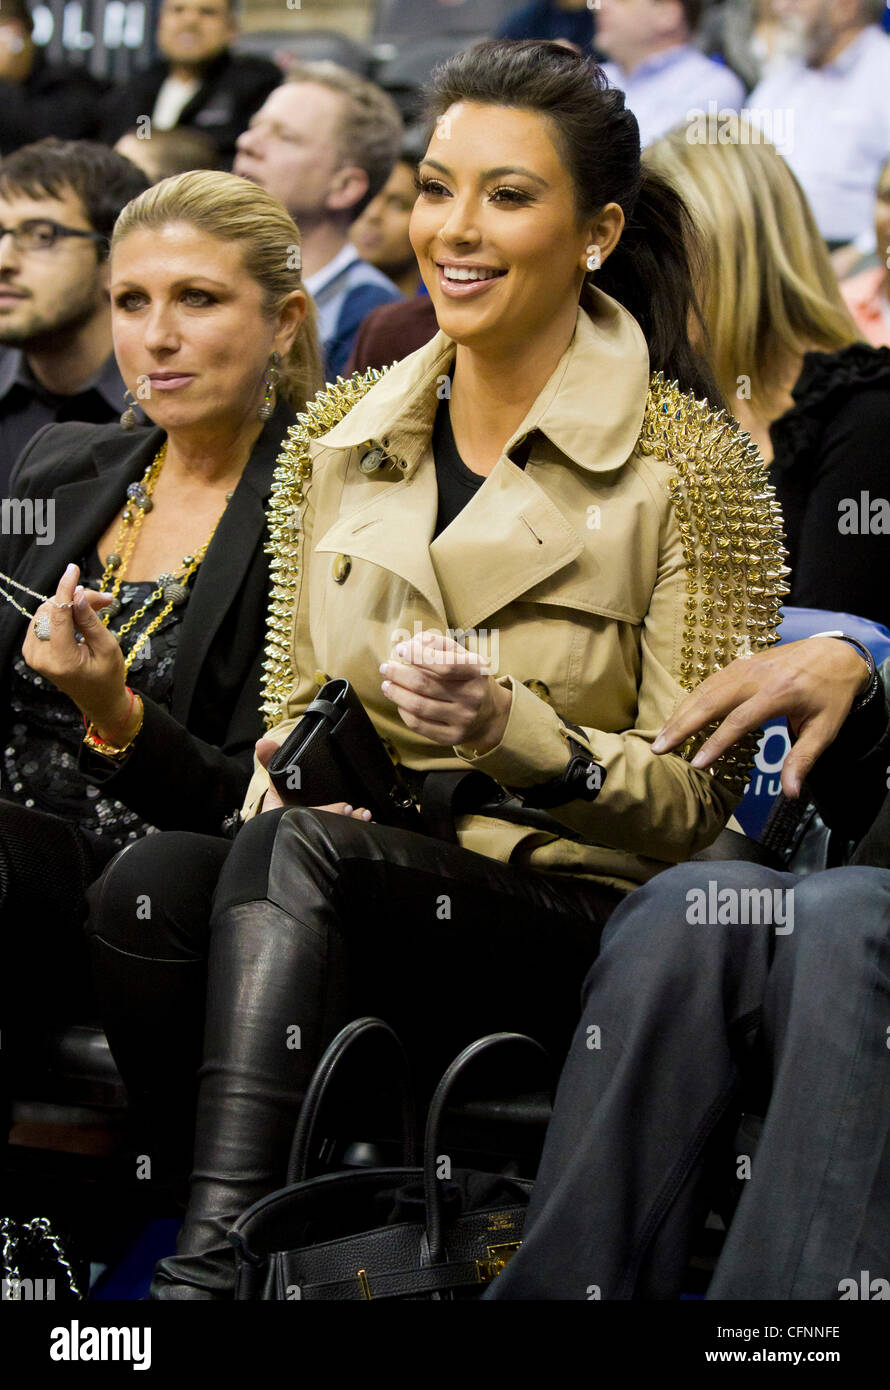 Kim Kardashian sits courtside during the NBA game between the New York  Knicks and the New Jersey Nets at the Prudential Center in Newark New Jersey,  USA - 12.02.11 Stock Photo - Alamy